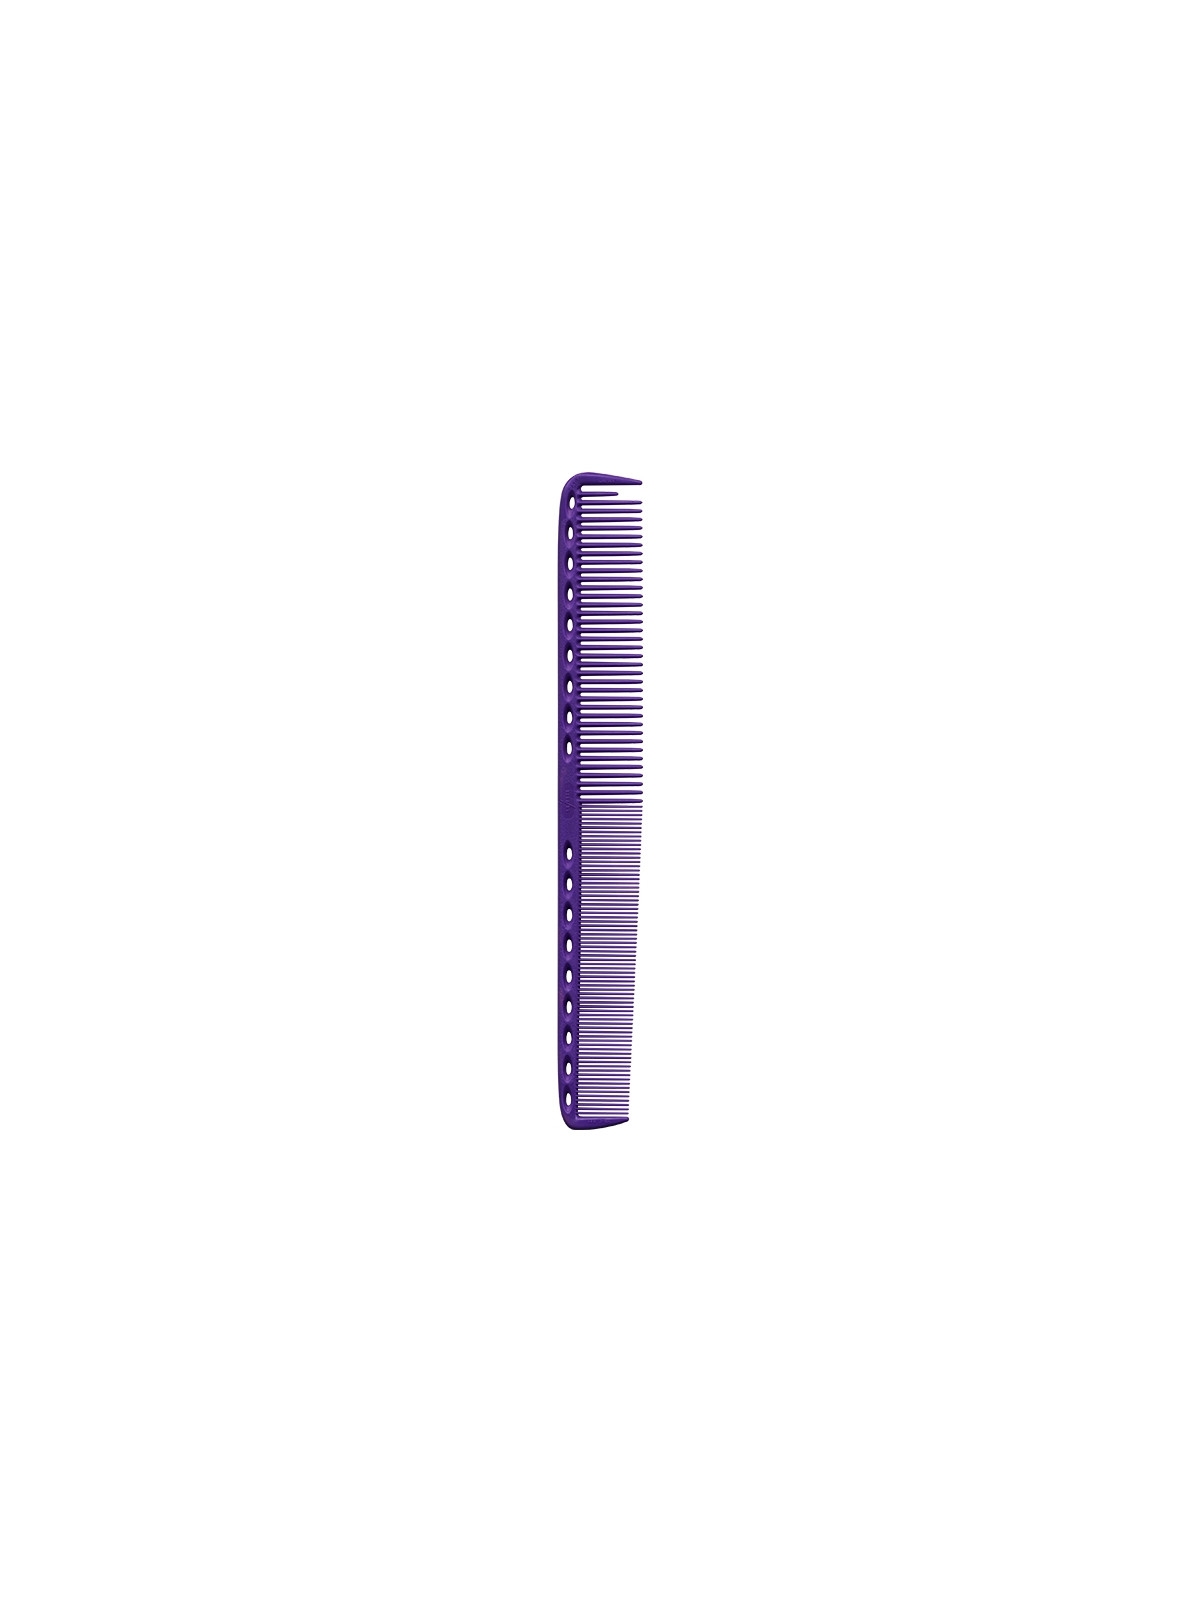 Y.S. Park 335 Long Fine Tooth Cutting Comb 215mm